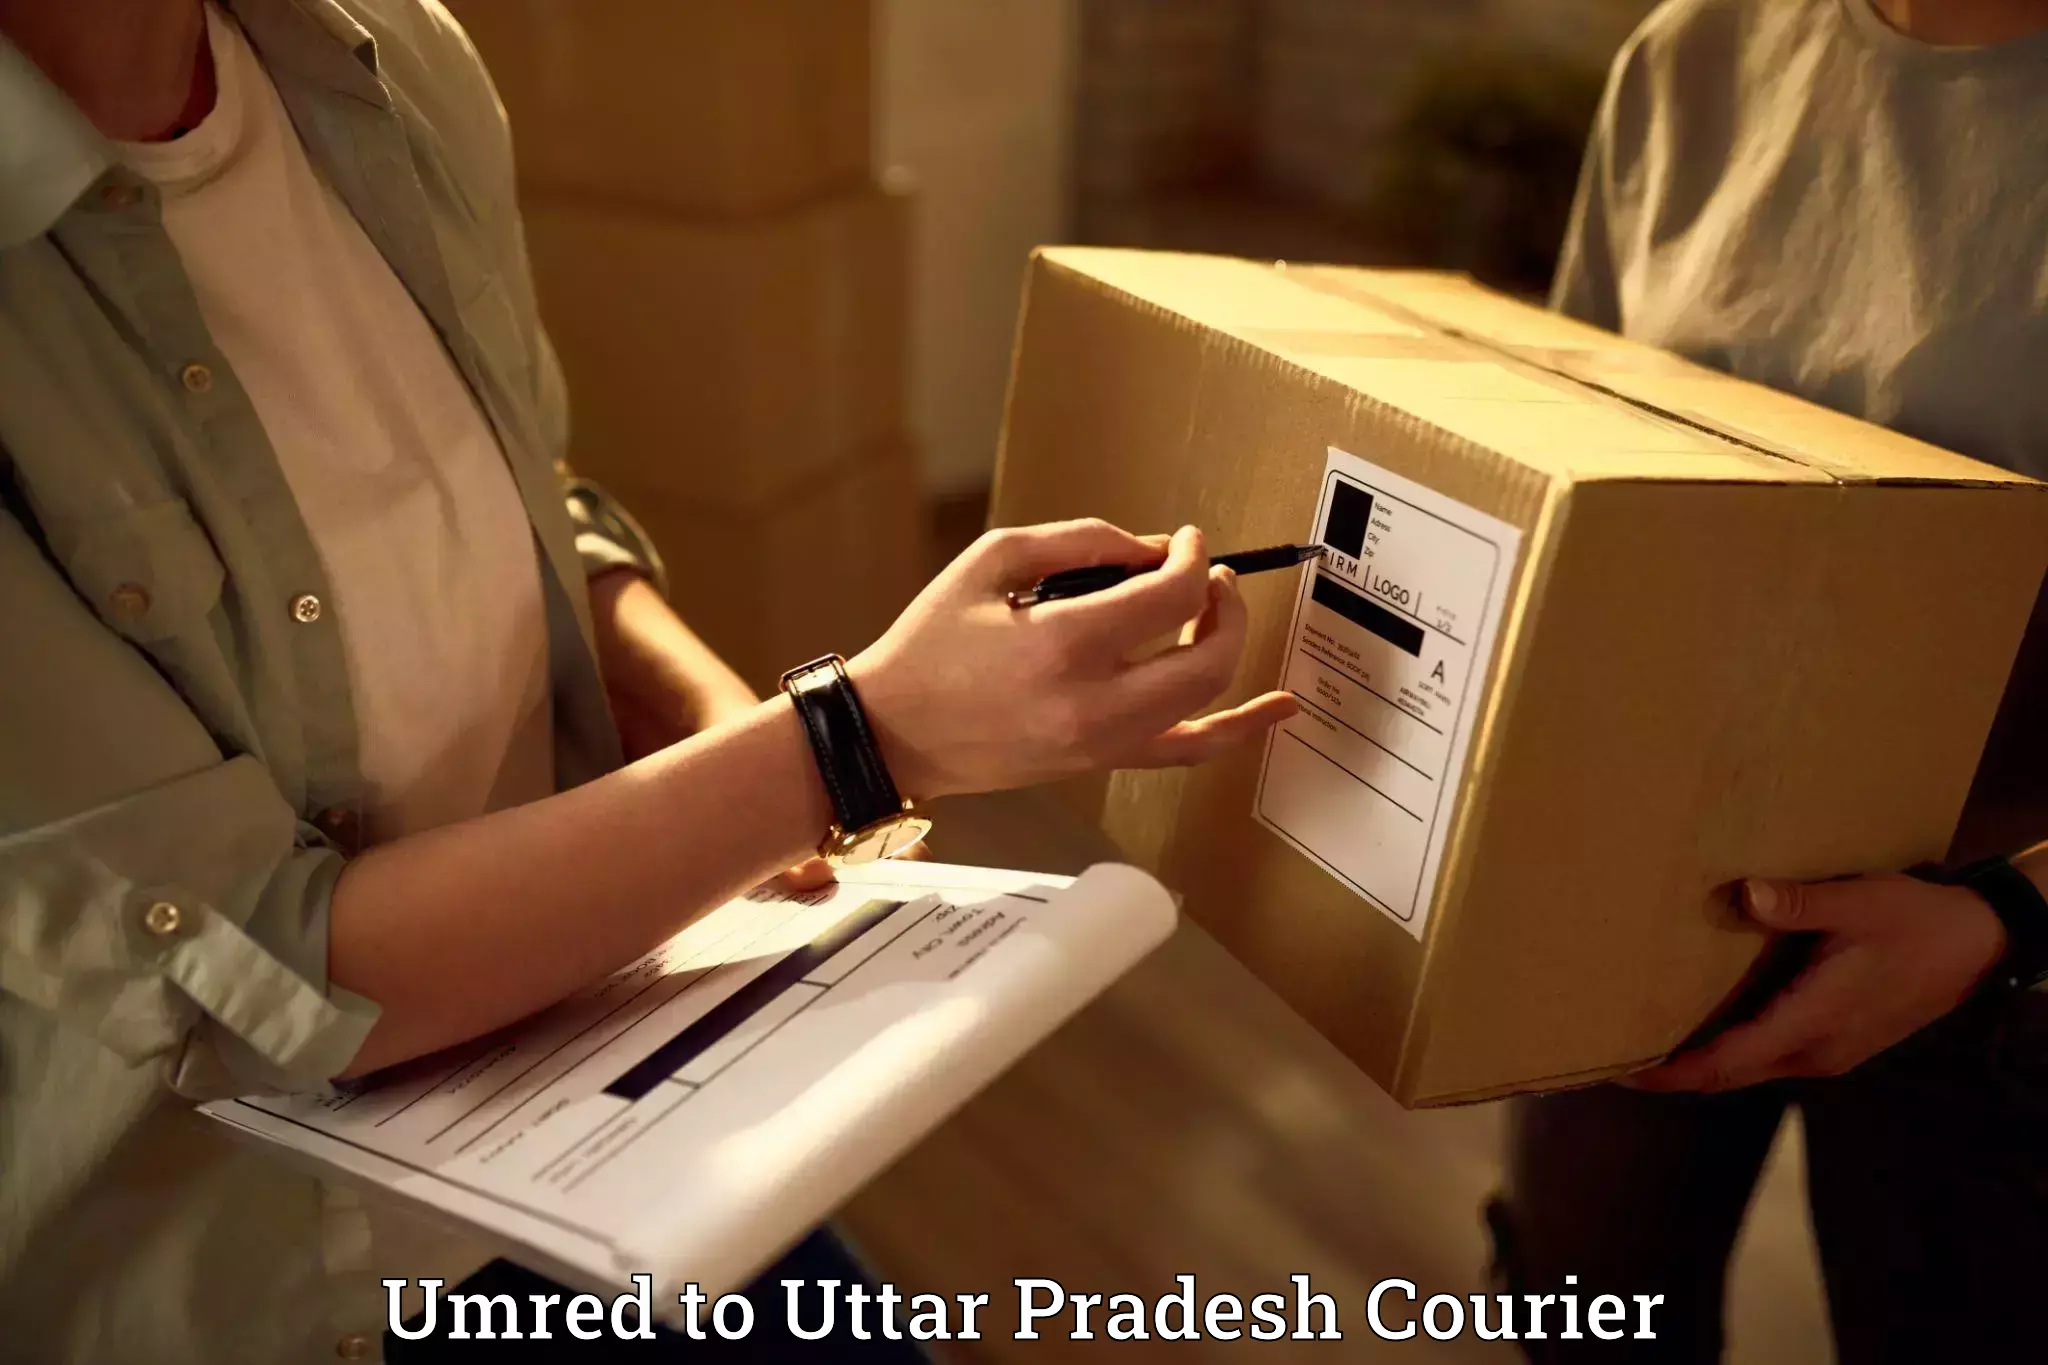 Furniture transport specialists Umred to Jiyanpur